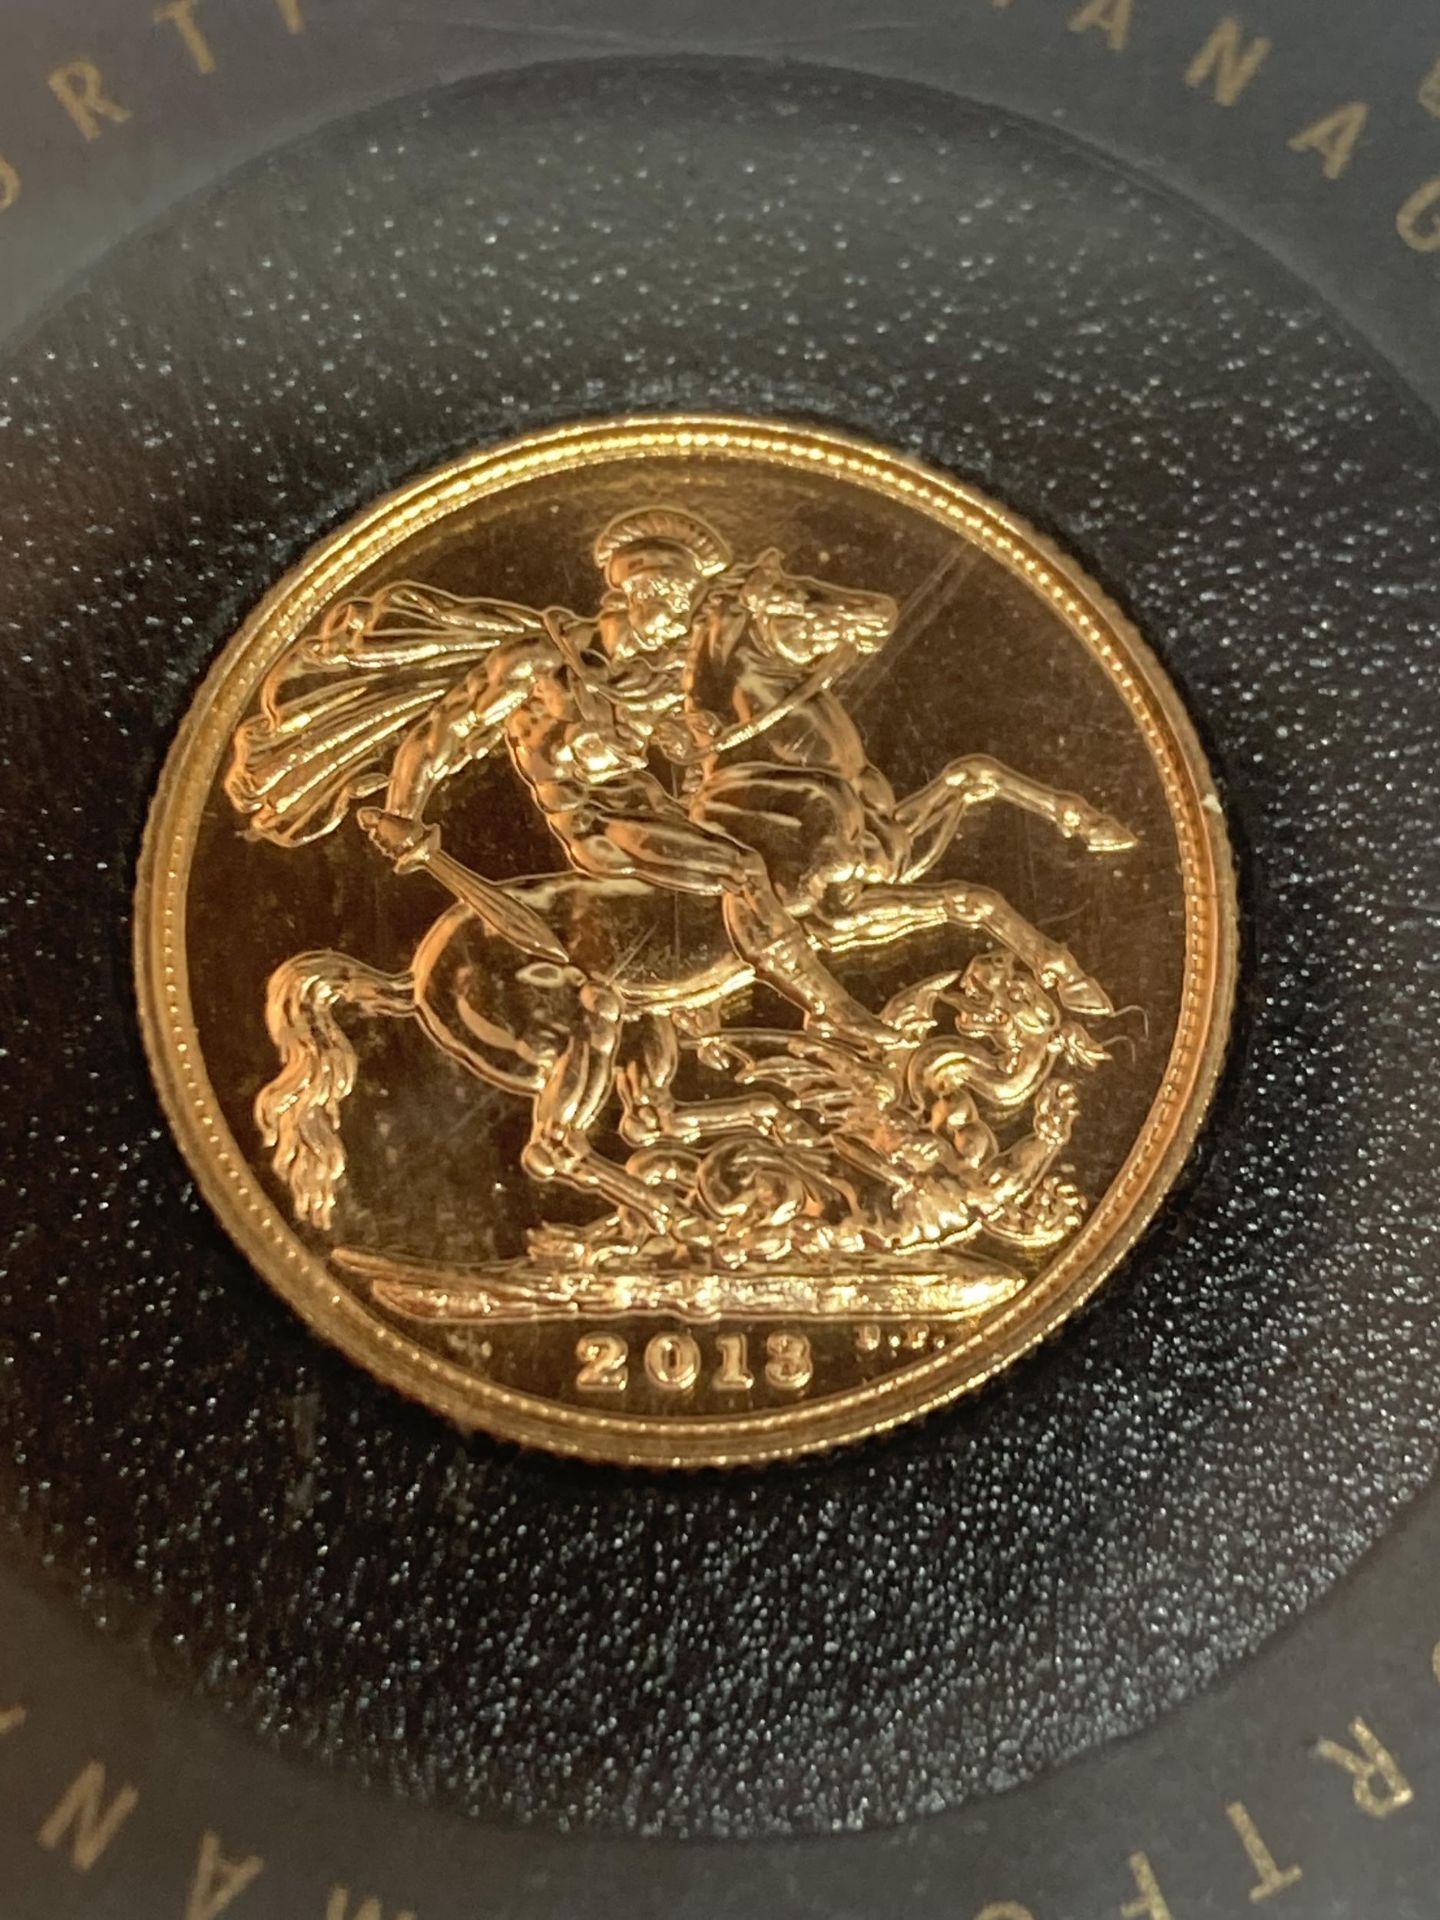 A CASED UNCIRCULATED GOLD SOVEREIGN DATED 2018 - Image 2 of 3